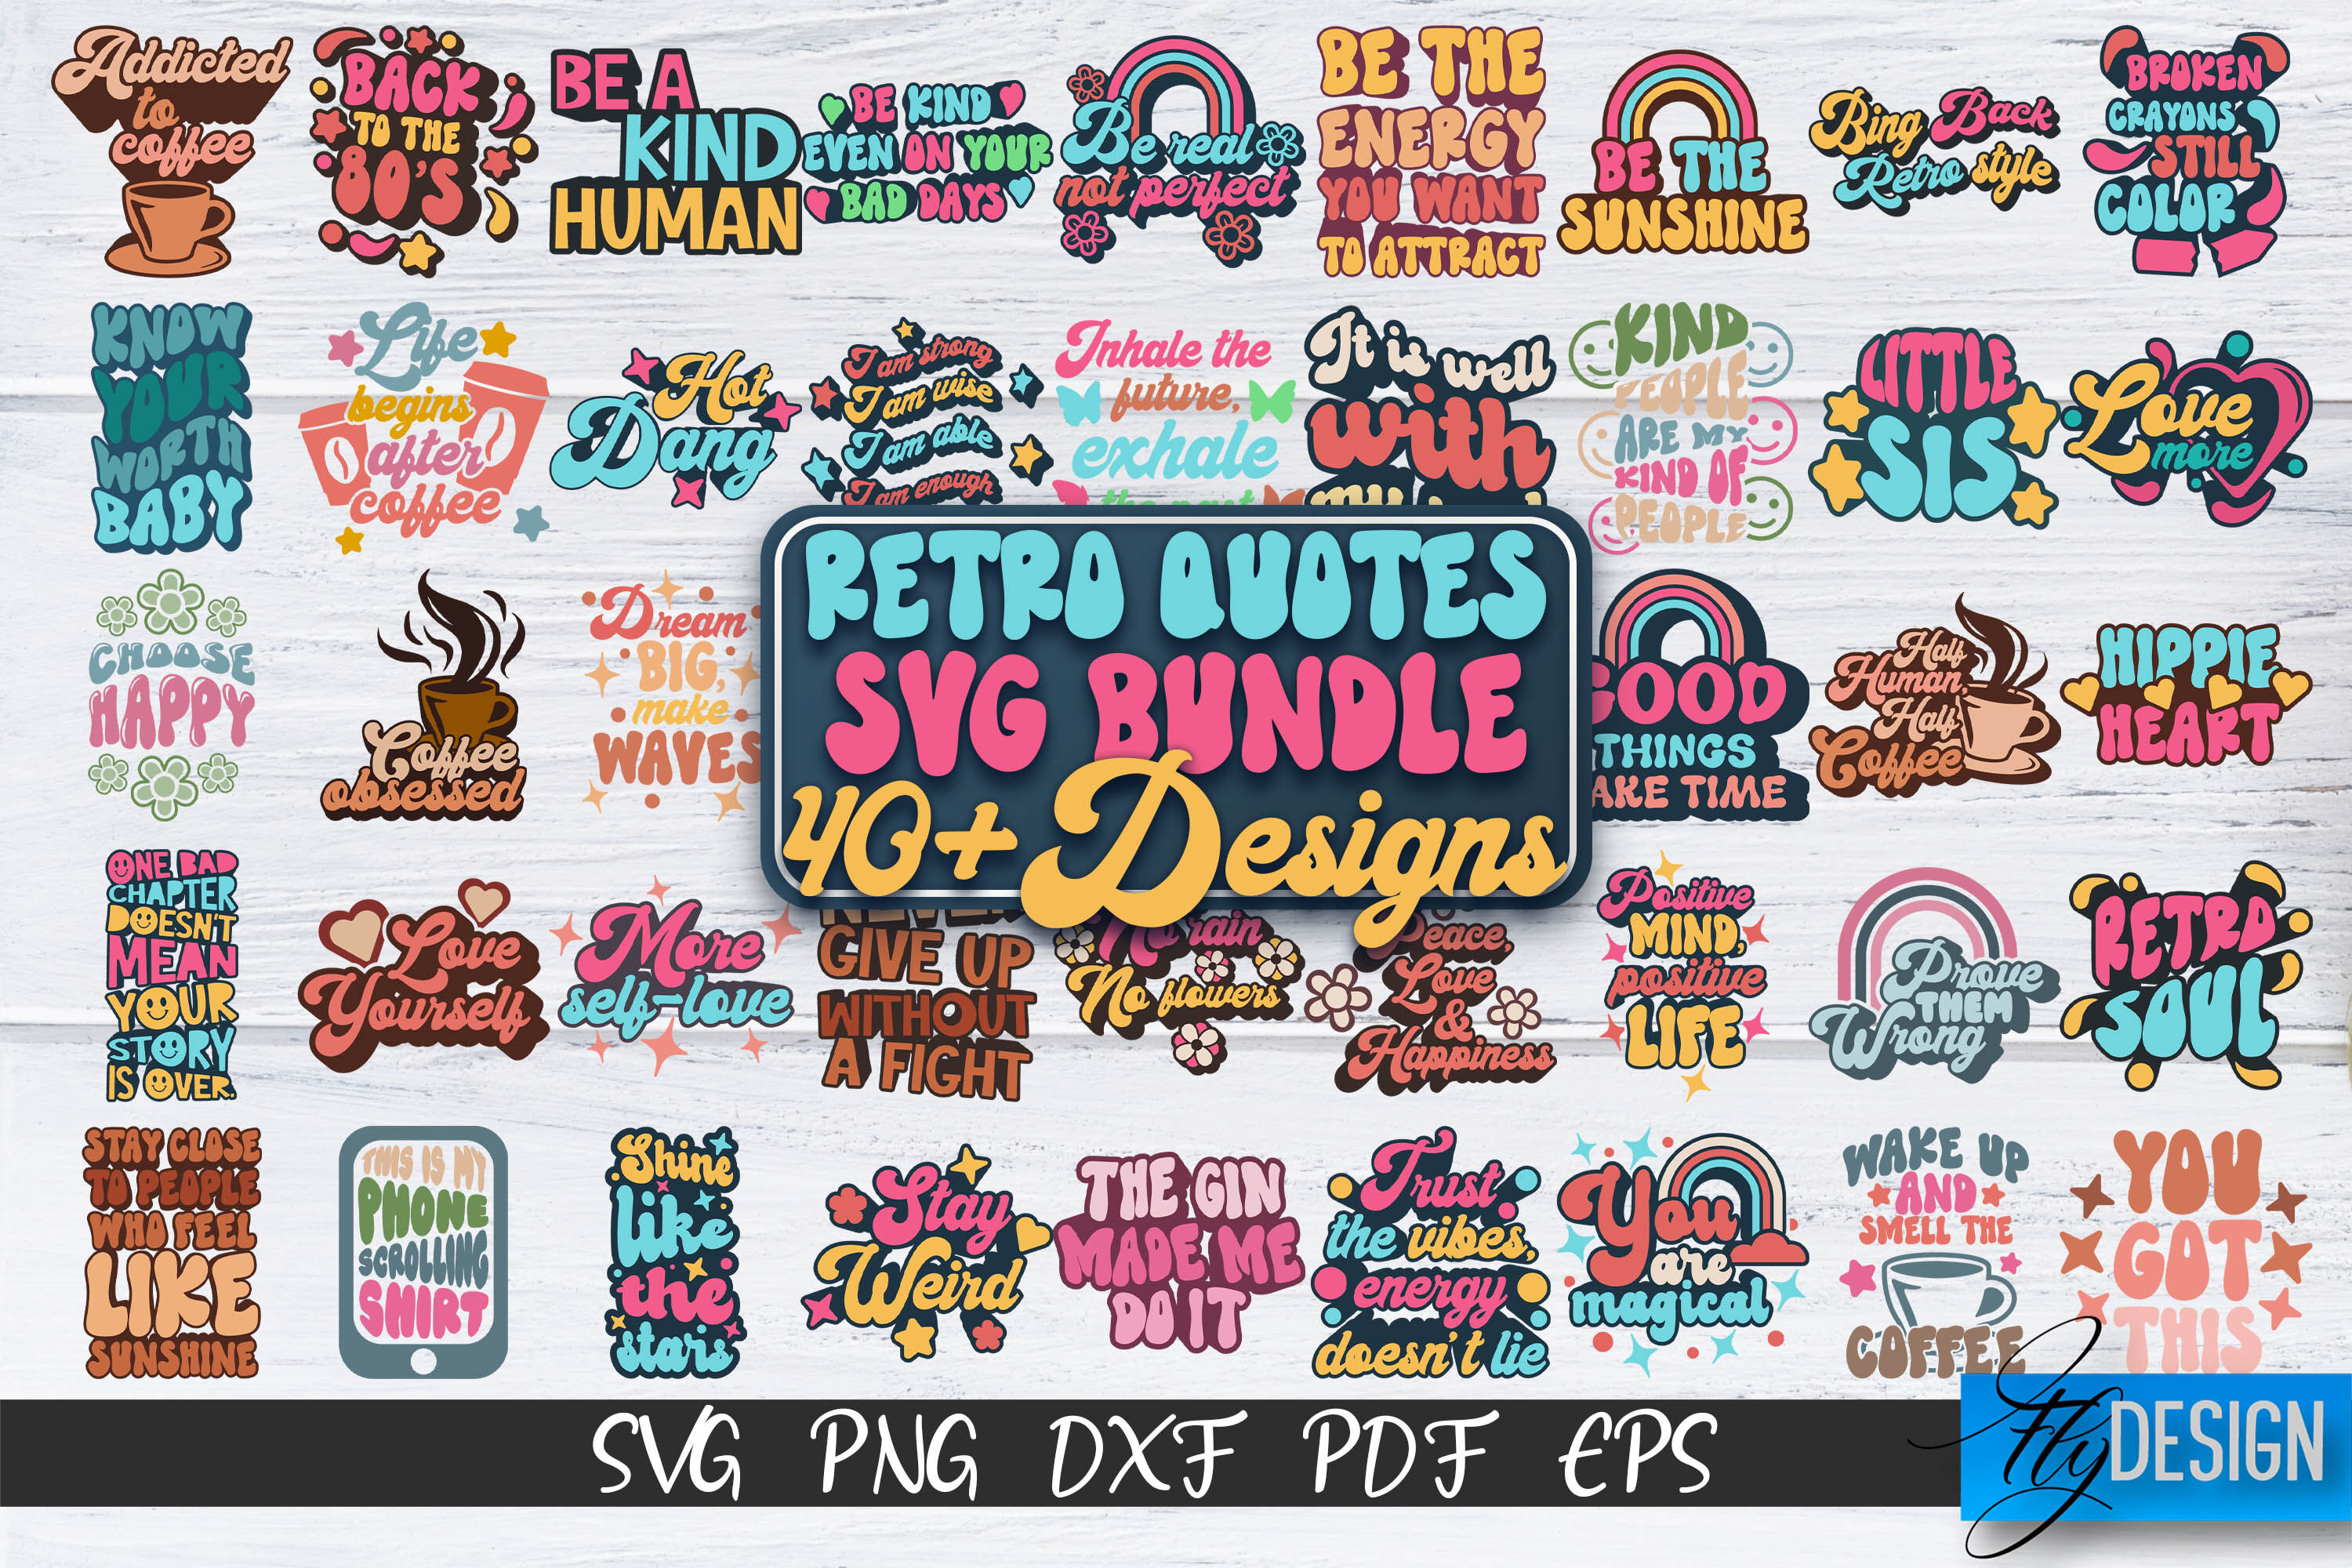 Large Quote Stickers - Book Quotes Volume 1